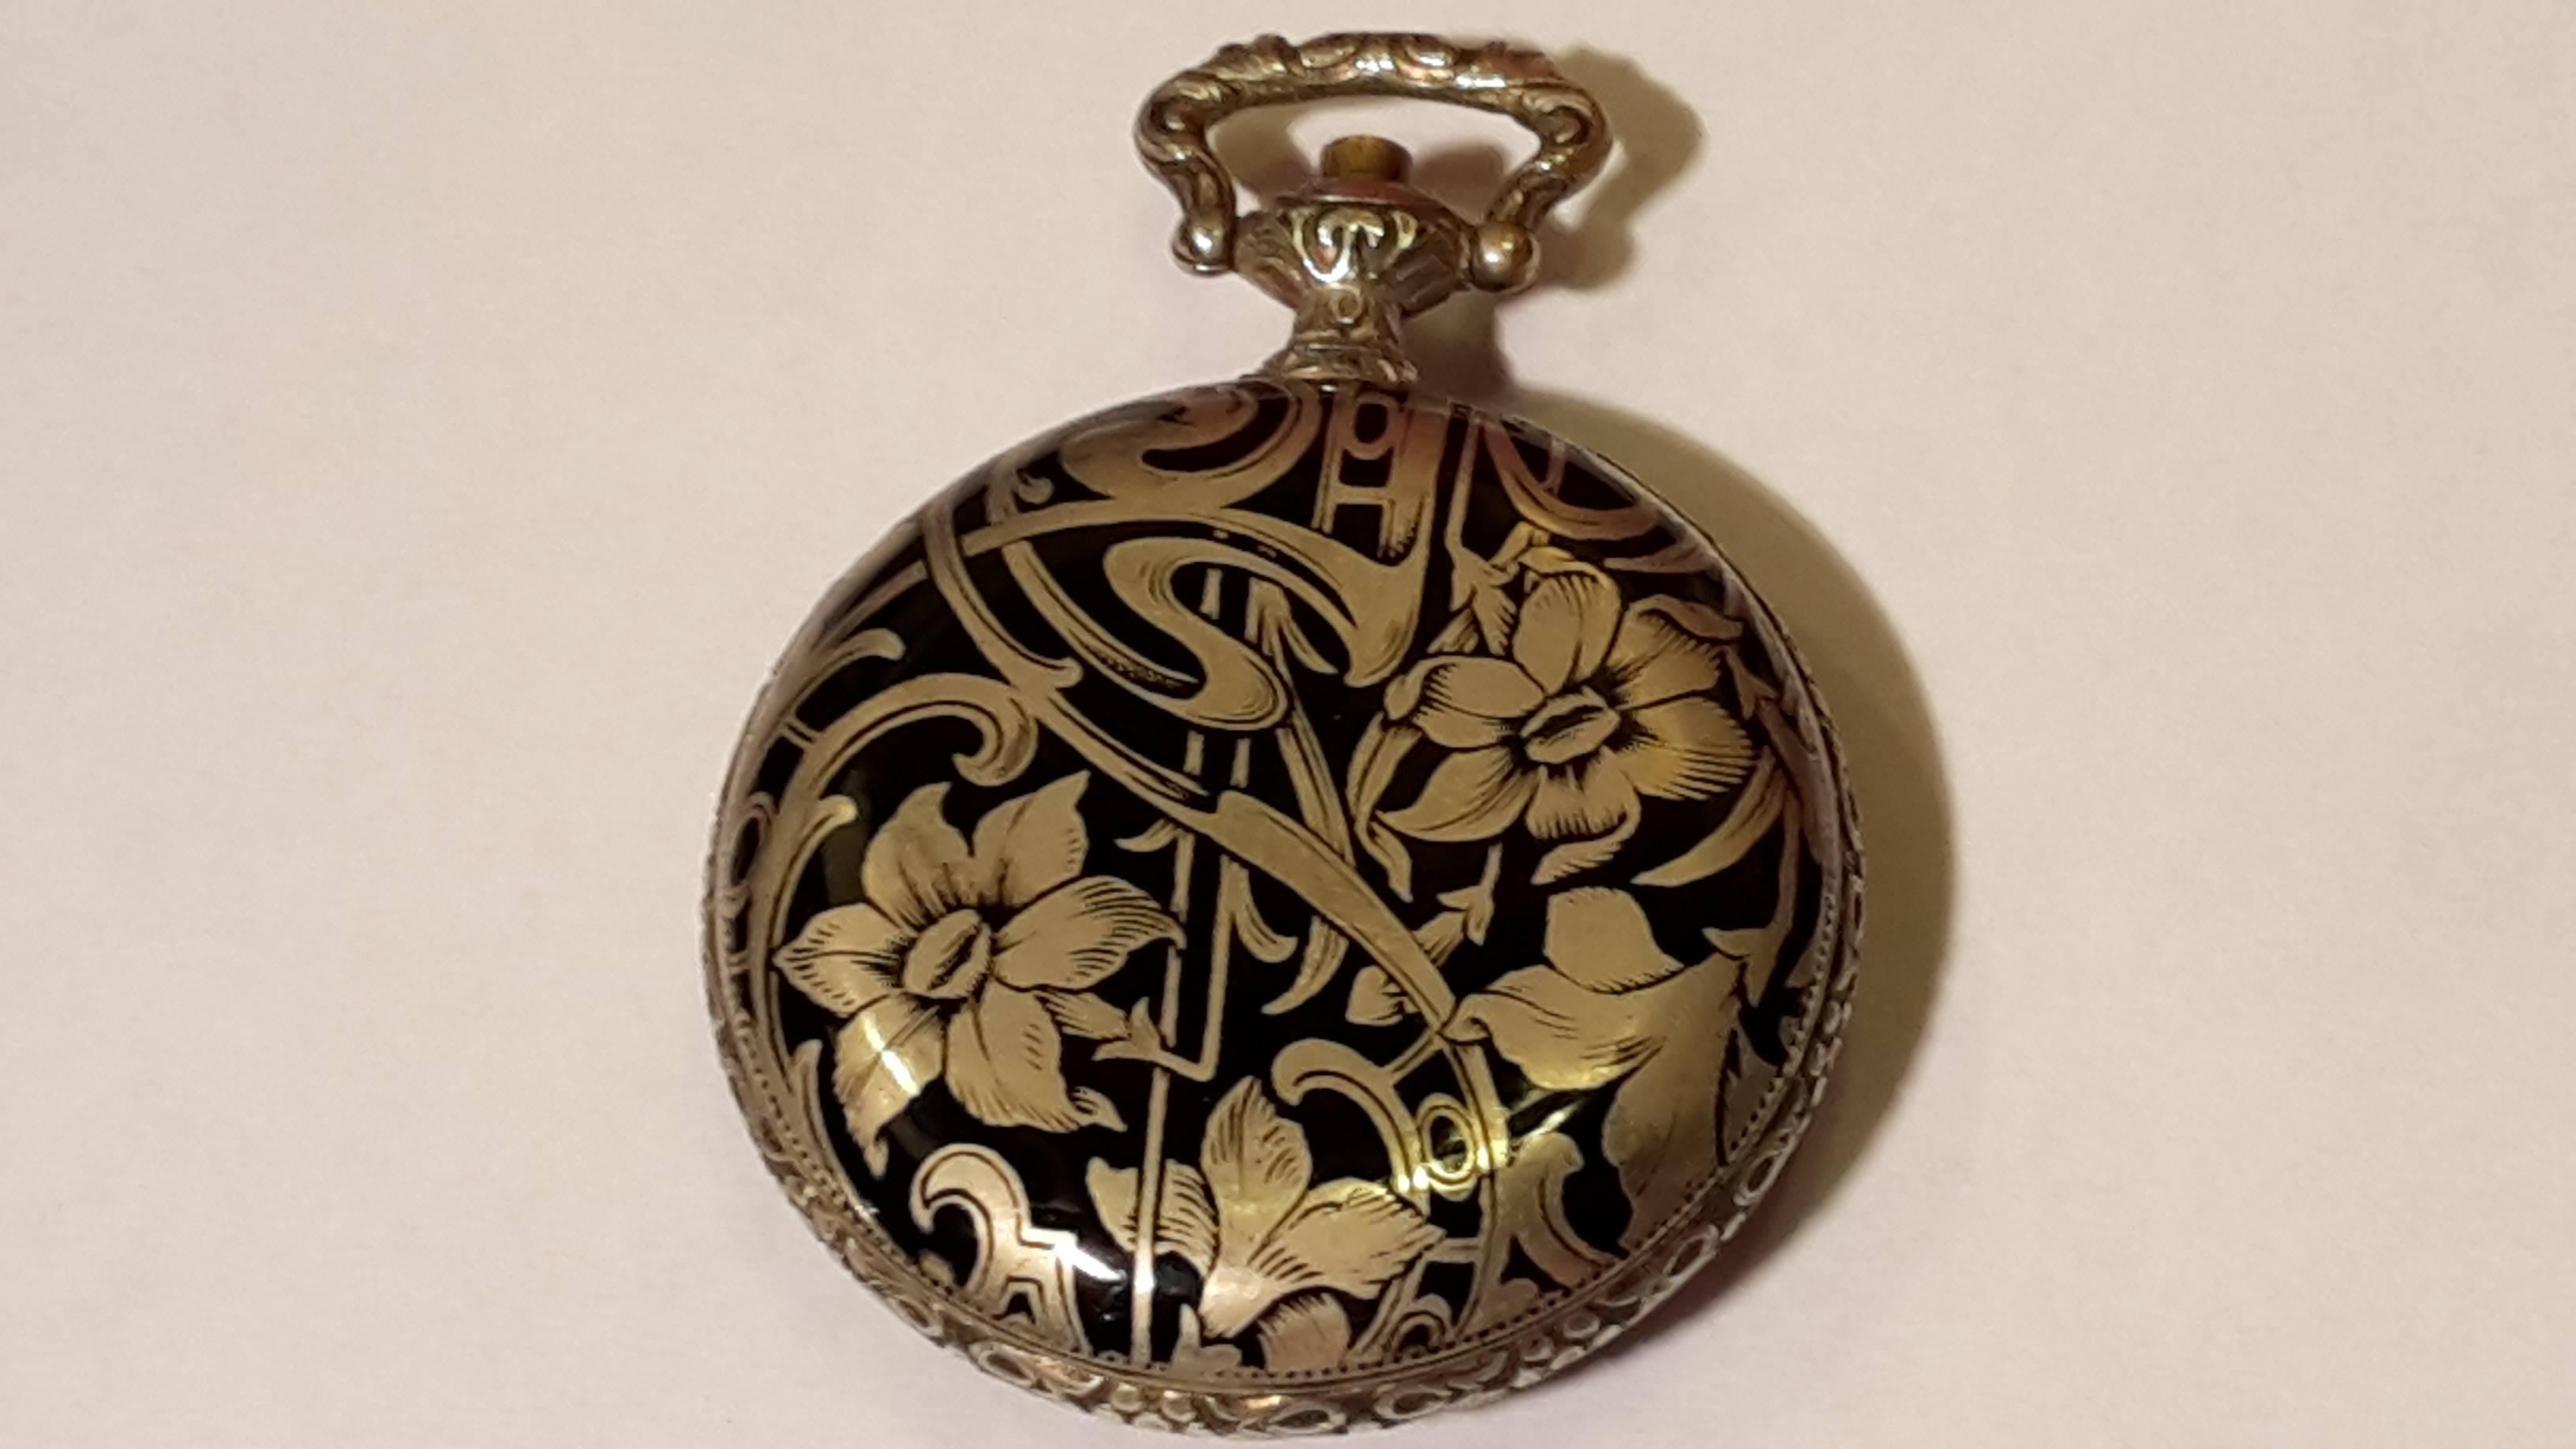 Beautiful clock (stopwatch) bought in Genoa, but of unknown origin (possibly French).
Contemporary, Art Nouveau-inspired, silver to 